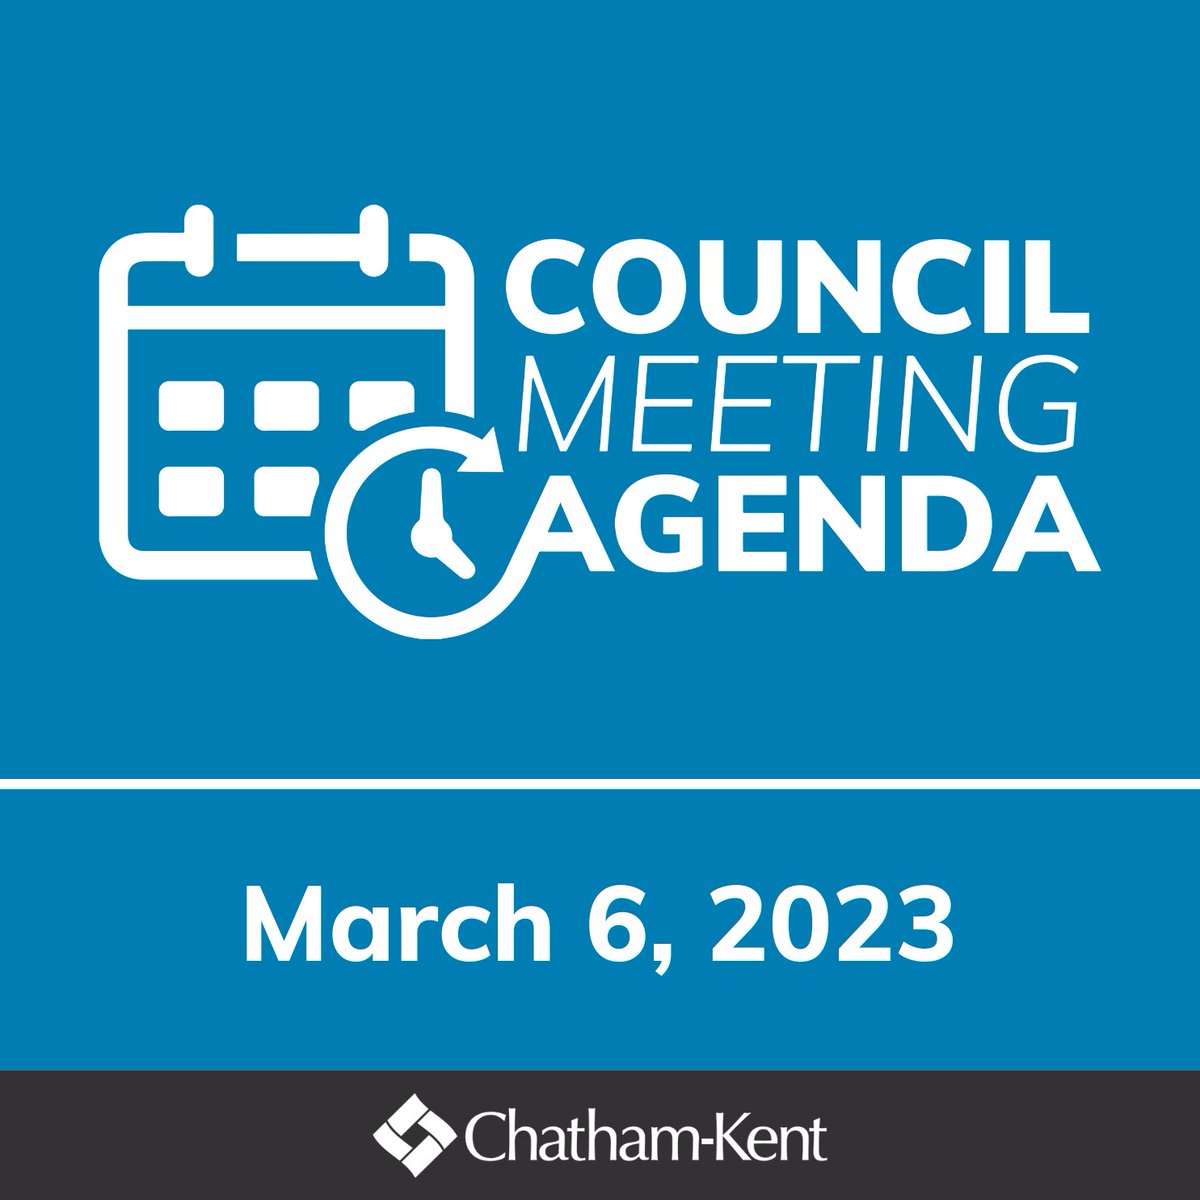 📢 Join us on our Facebook page for Monday's Council Meeting - March 6th, 6:00 pm. ▶️ To view the agenda, visit: pub-chatham-kent.escribemeetings.com/Meeting.aspx?I… #ckont